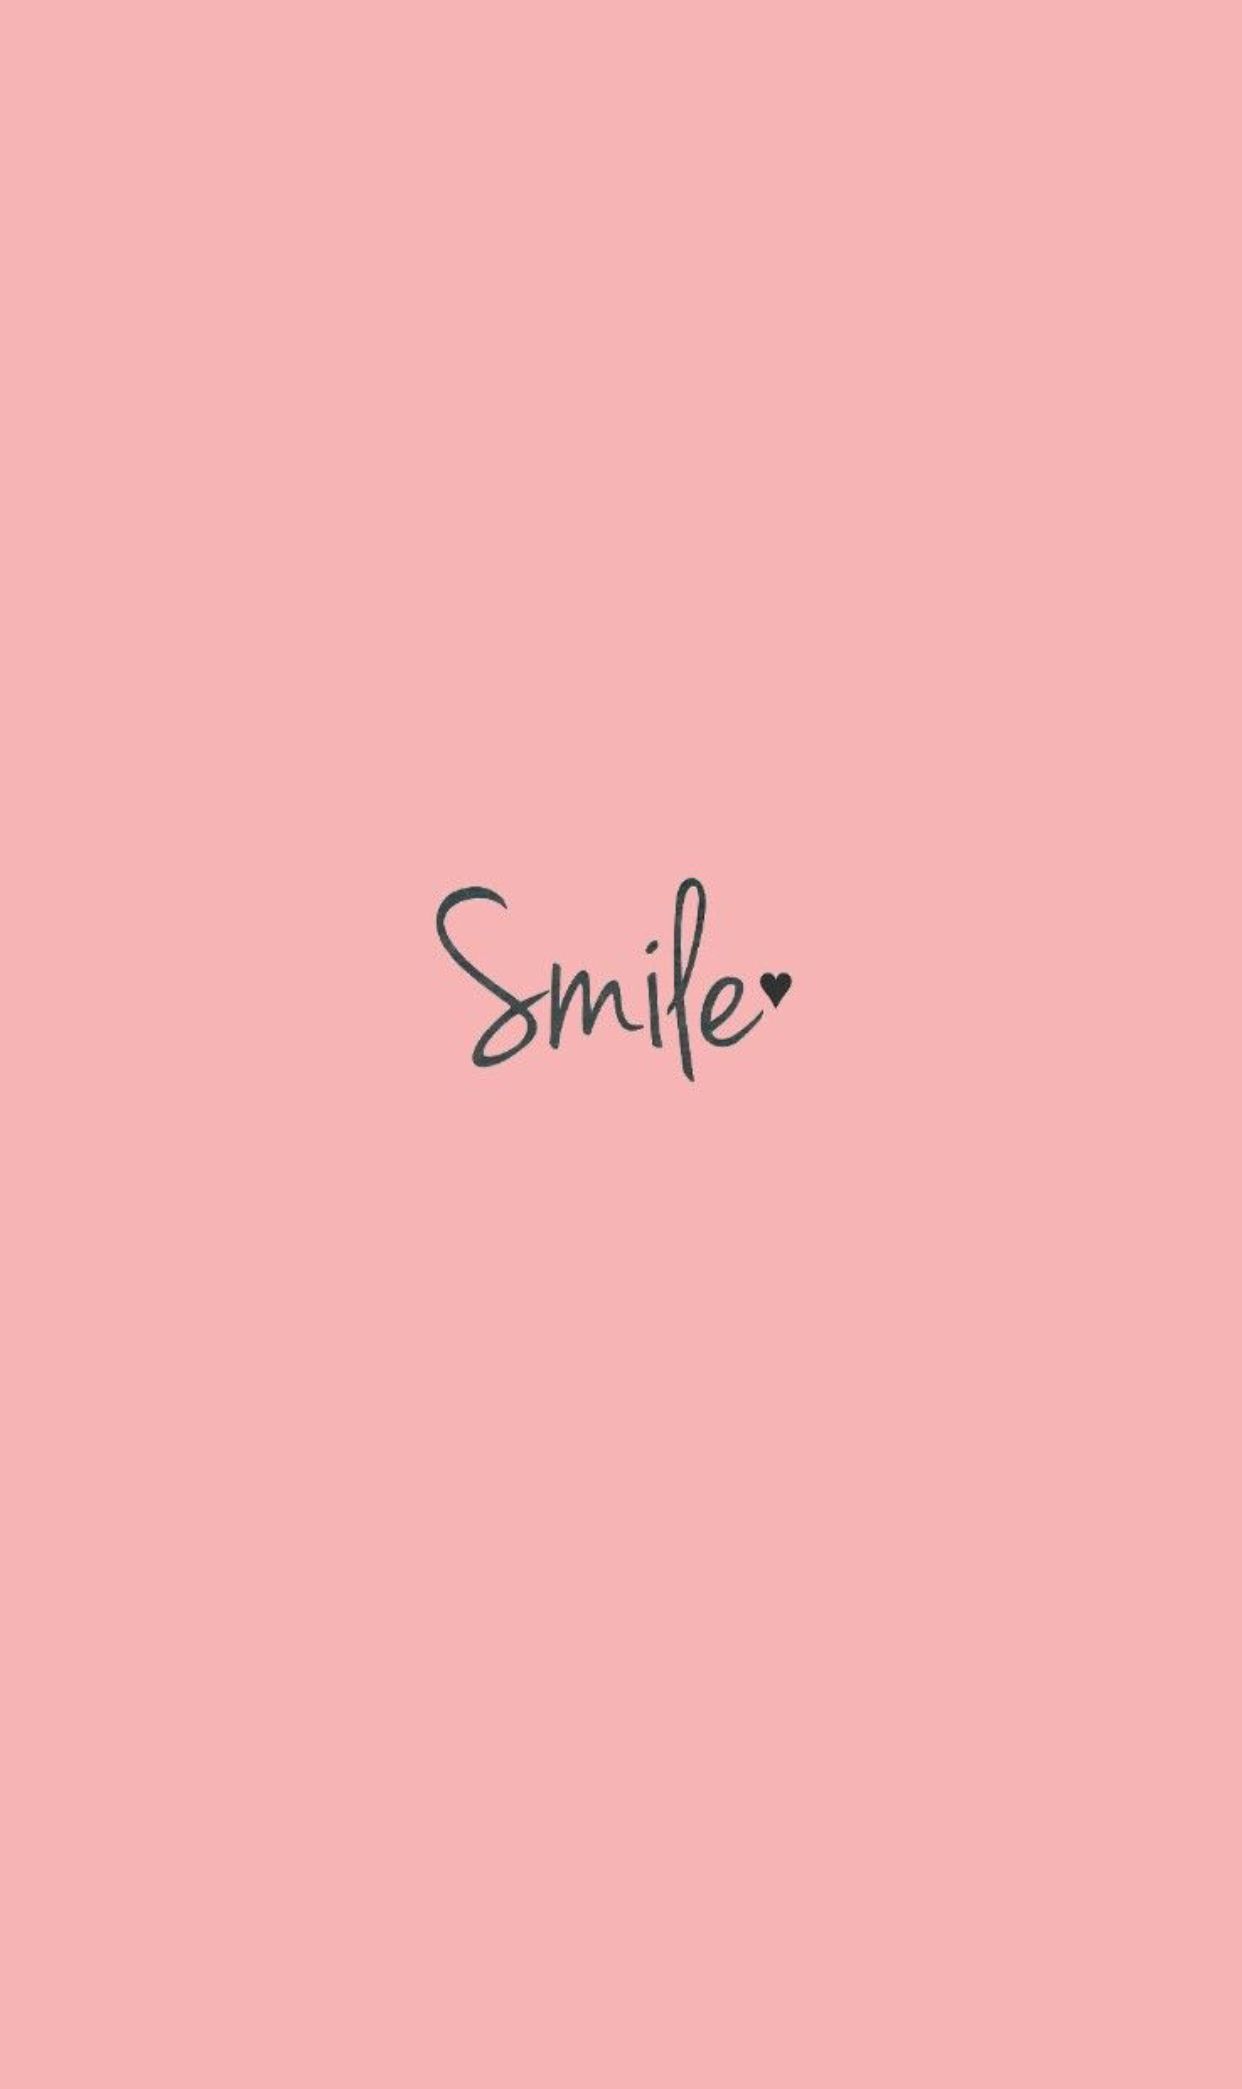 IPhone wallpaper with the word smile on it - Apple Watch